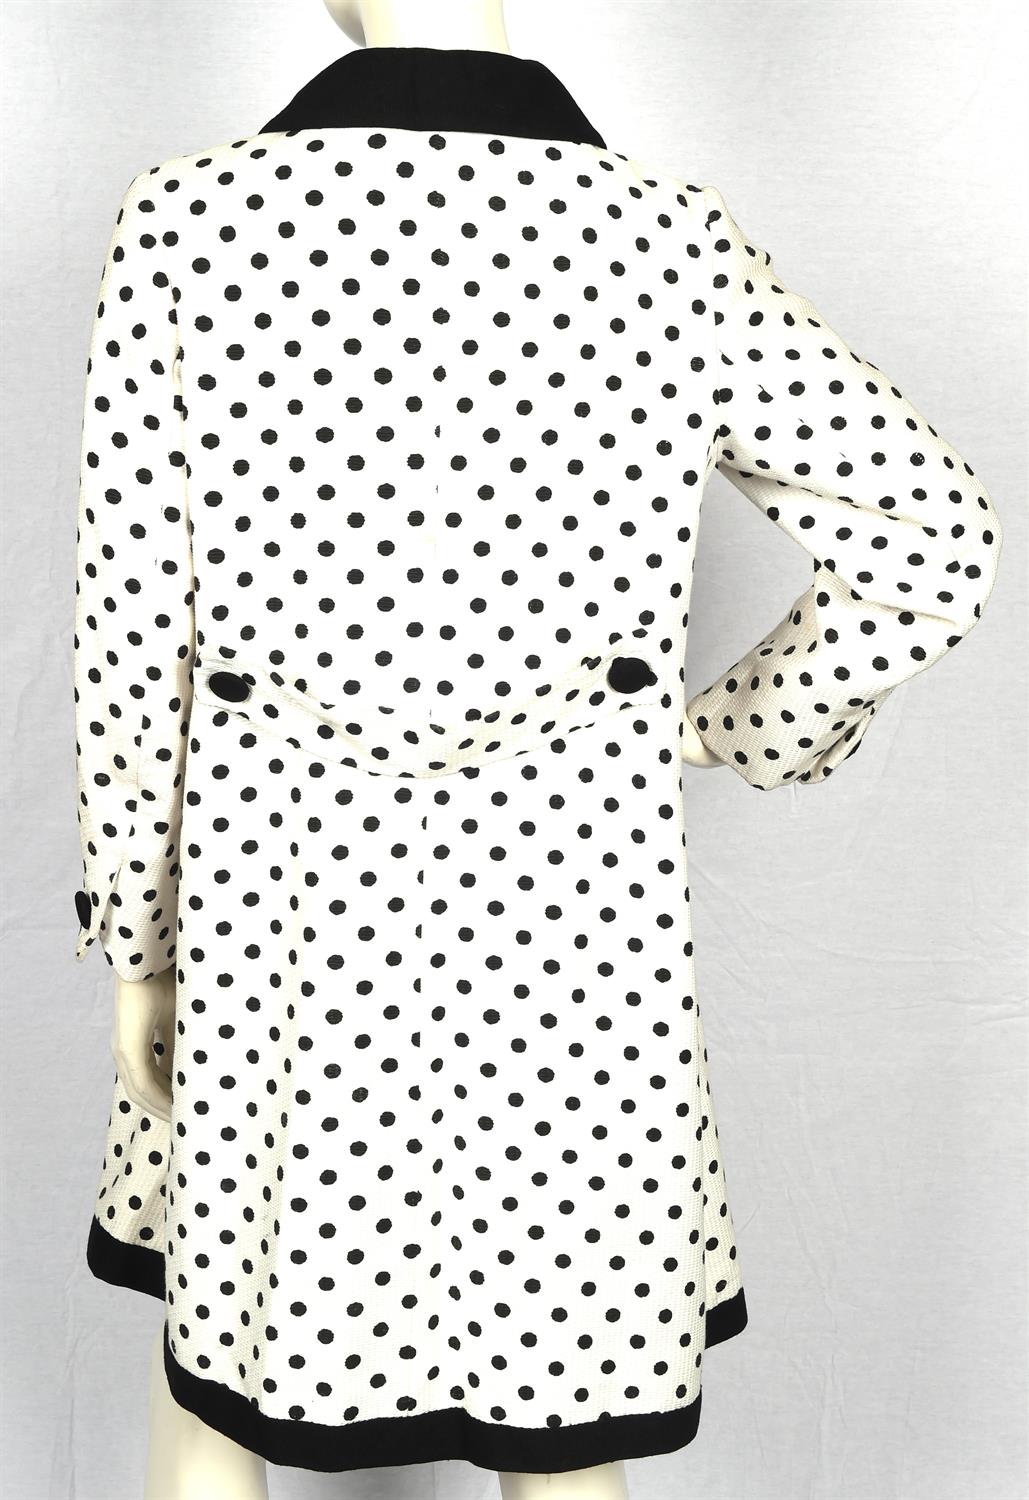 CHRISTIAN DIOR "DIORLING" 1960s silk and wool duster-coat with black polka-dots. Fully lined with - Image 4 of 6